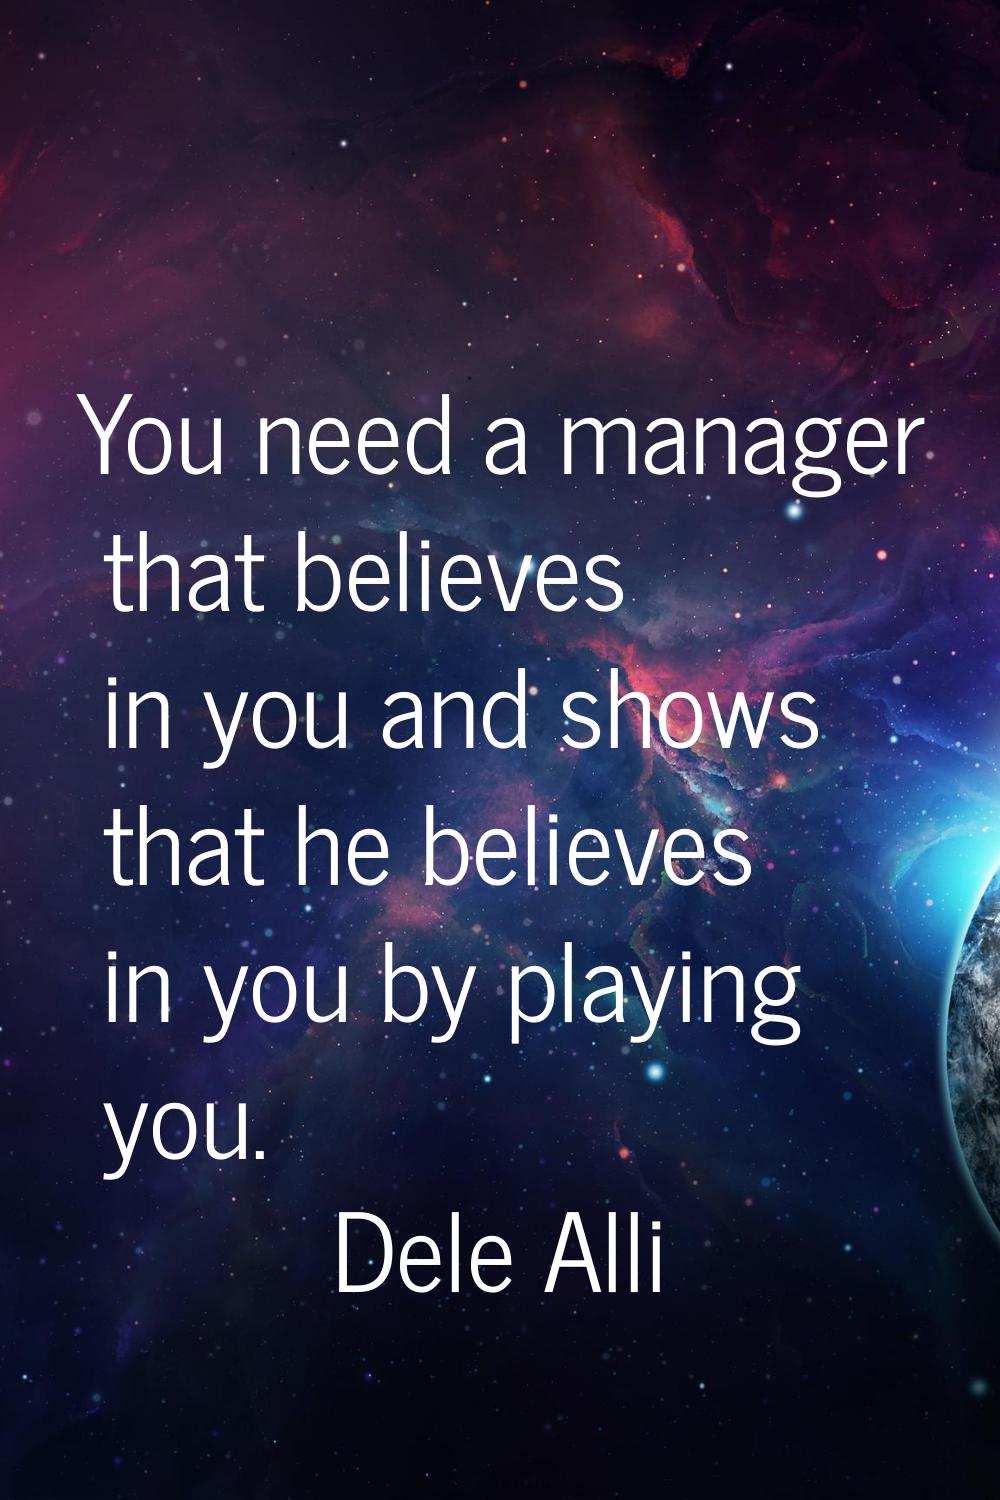 You need a manager that believes in you and shows that he believes in you by playing you.